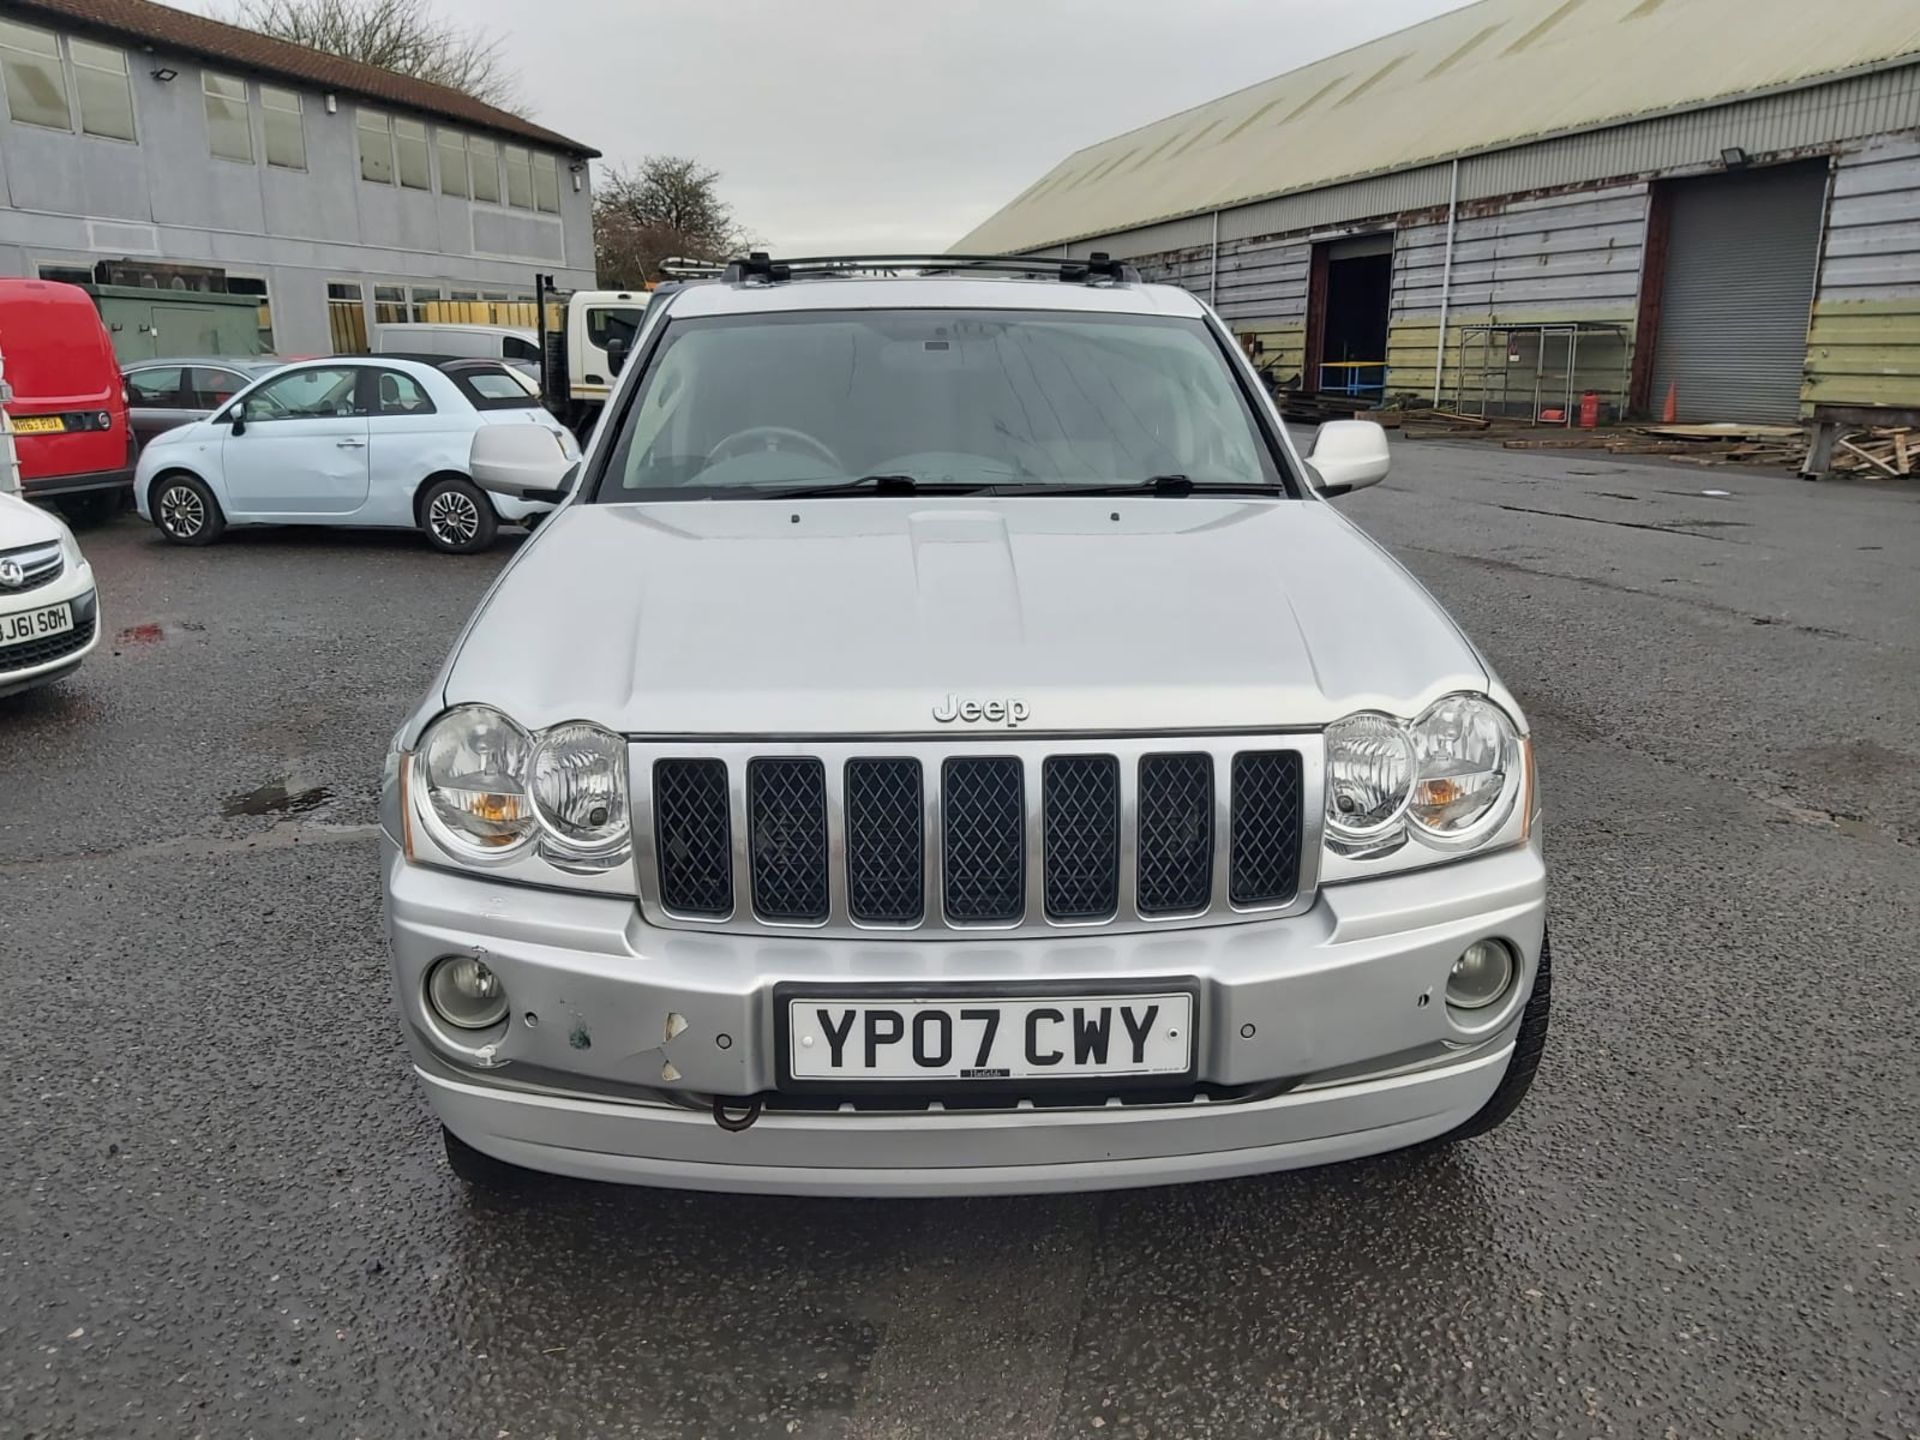 NO RESERVE 2007 JEEP G-CHEROKEE OVERLAND CRD A SILVER SUV ESTATE *NO VAT* - Image 2 of 17